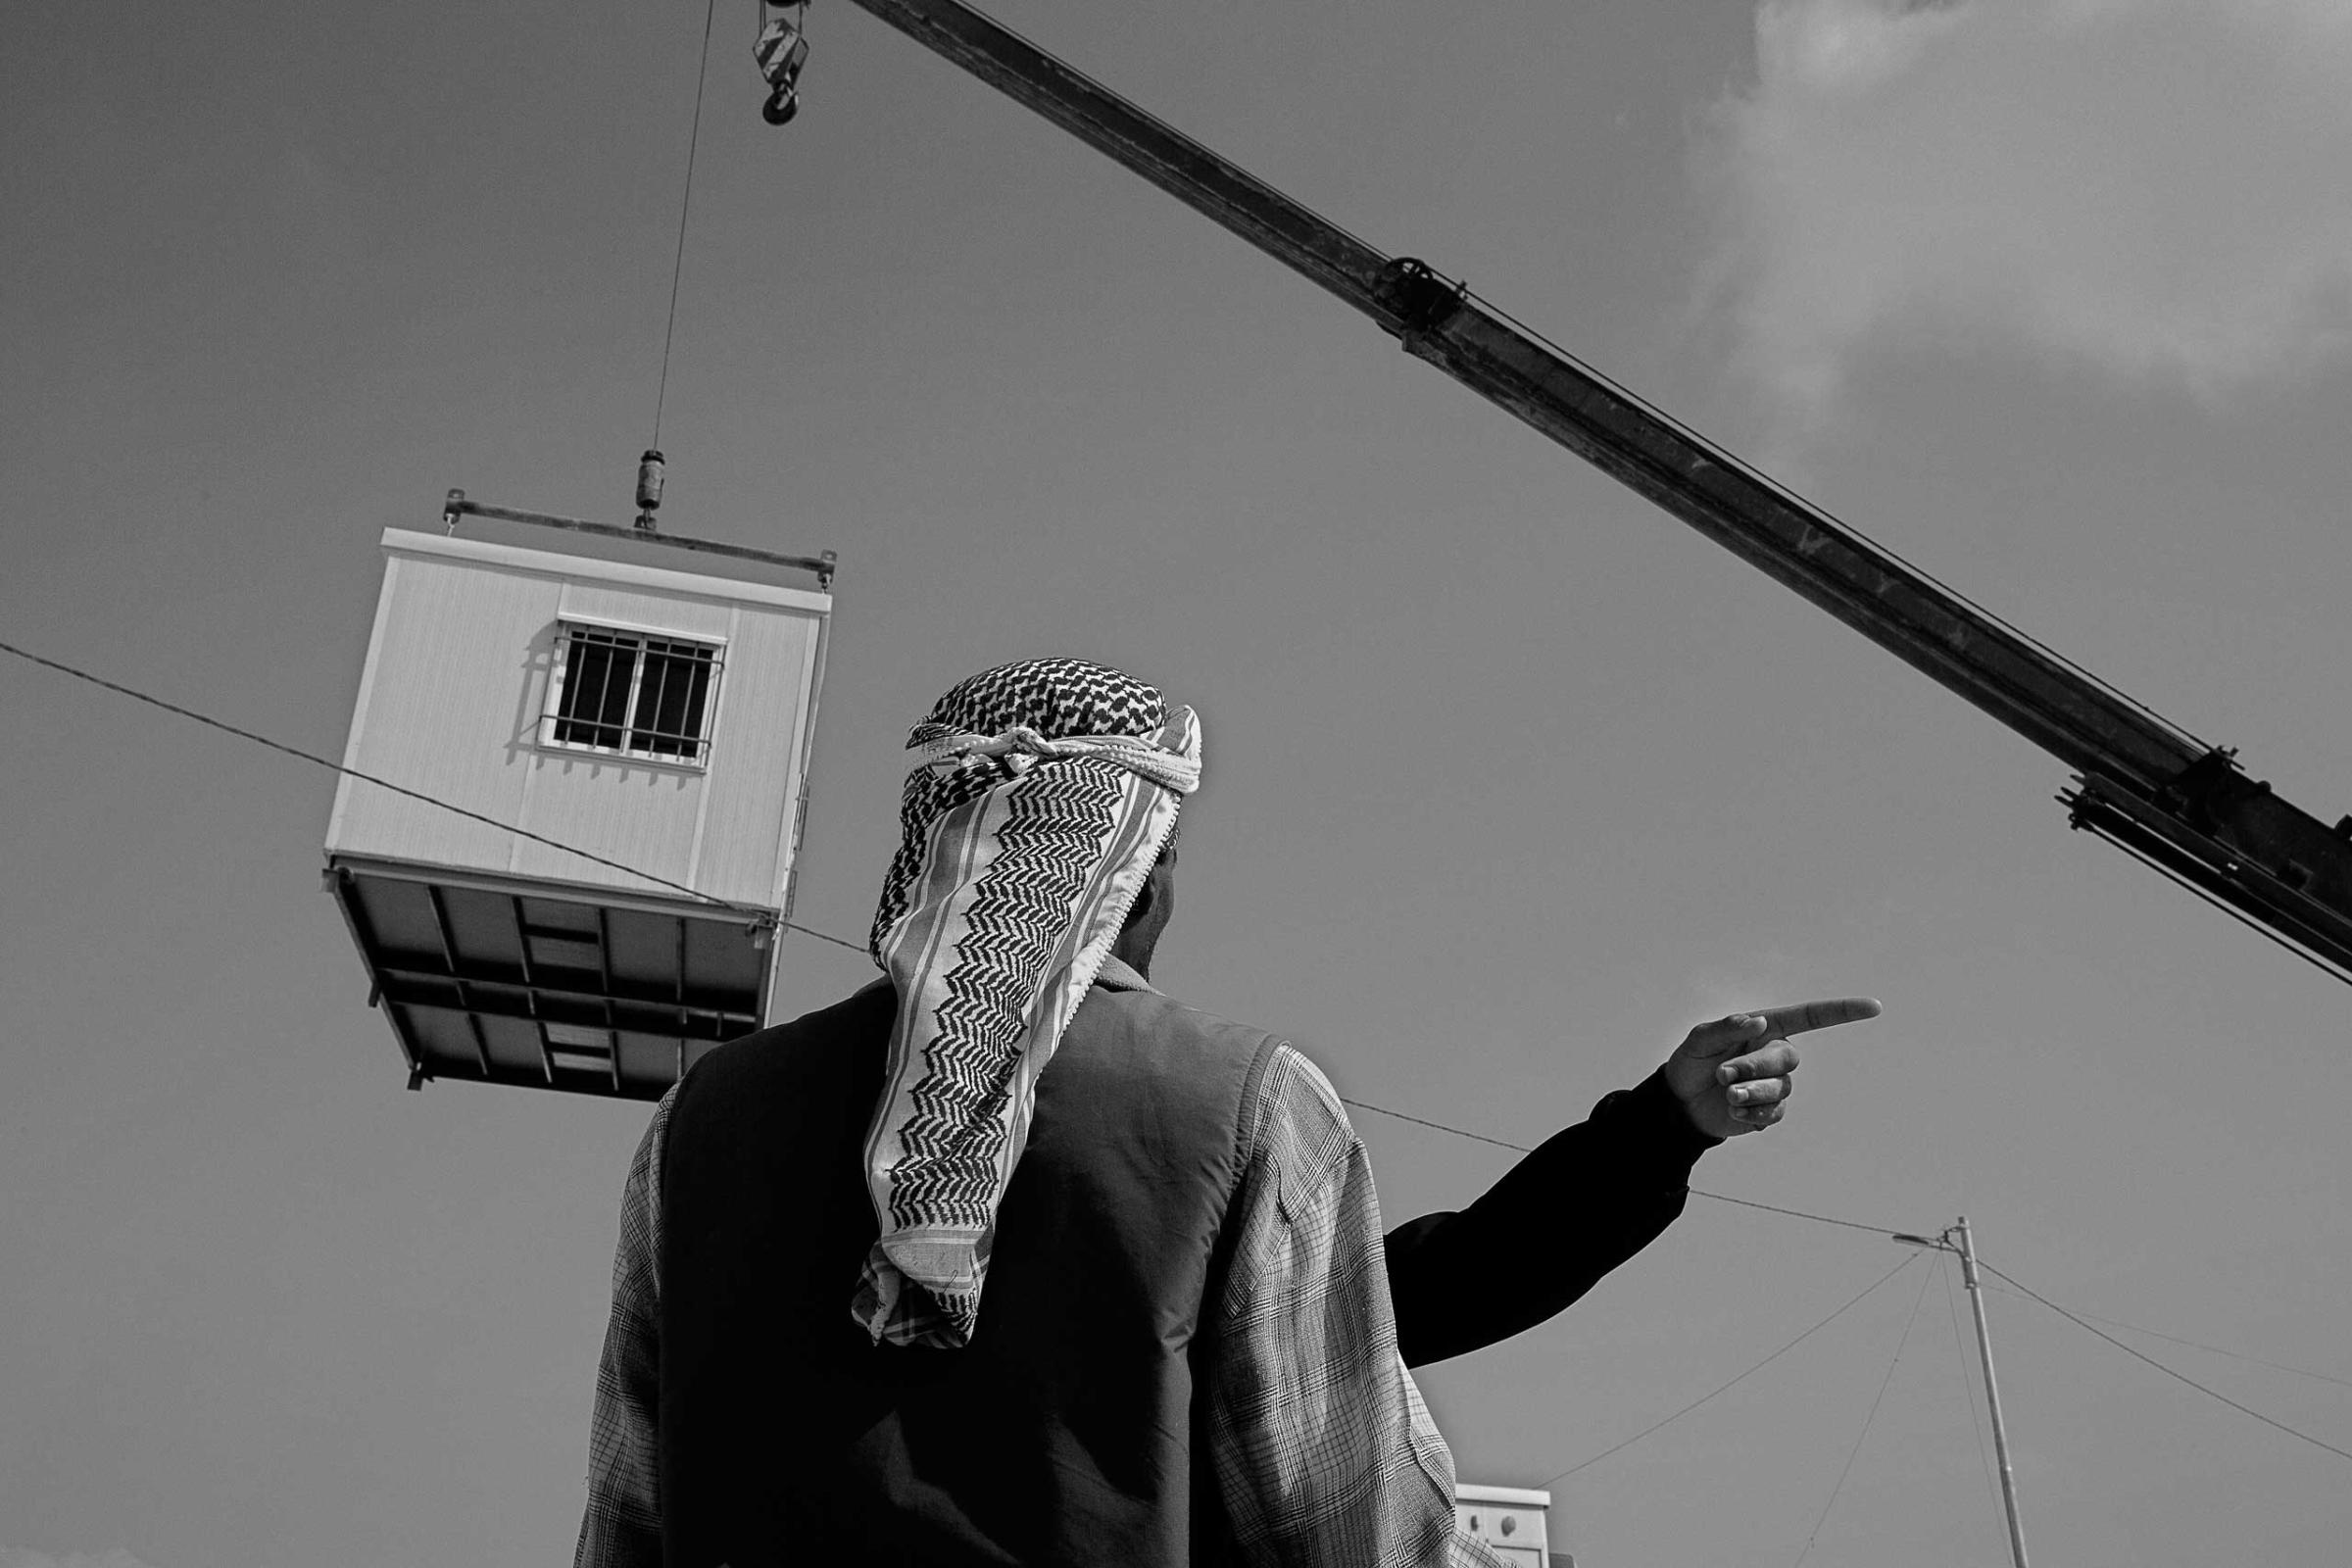 December 2013. Za'atari refugee camp, Jordan. A Syrian refugee watches a prefabricated unit being delivered to replace makeshift tents.